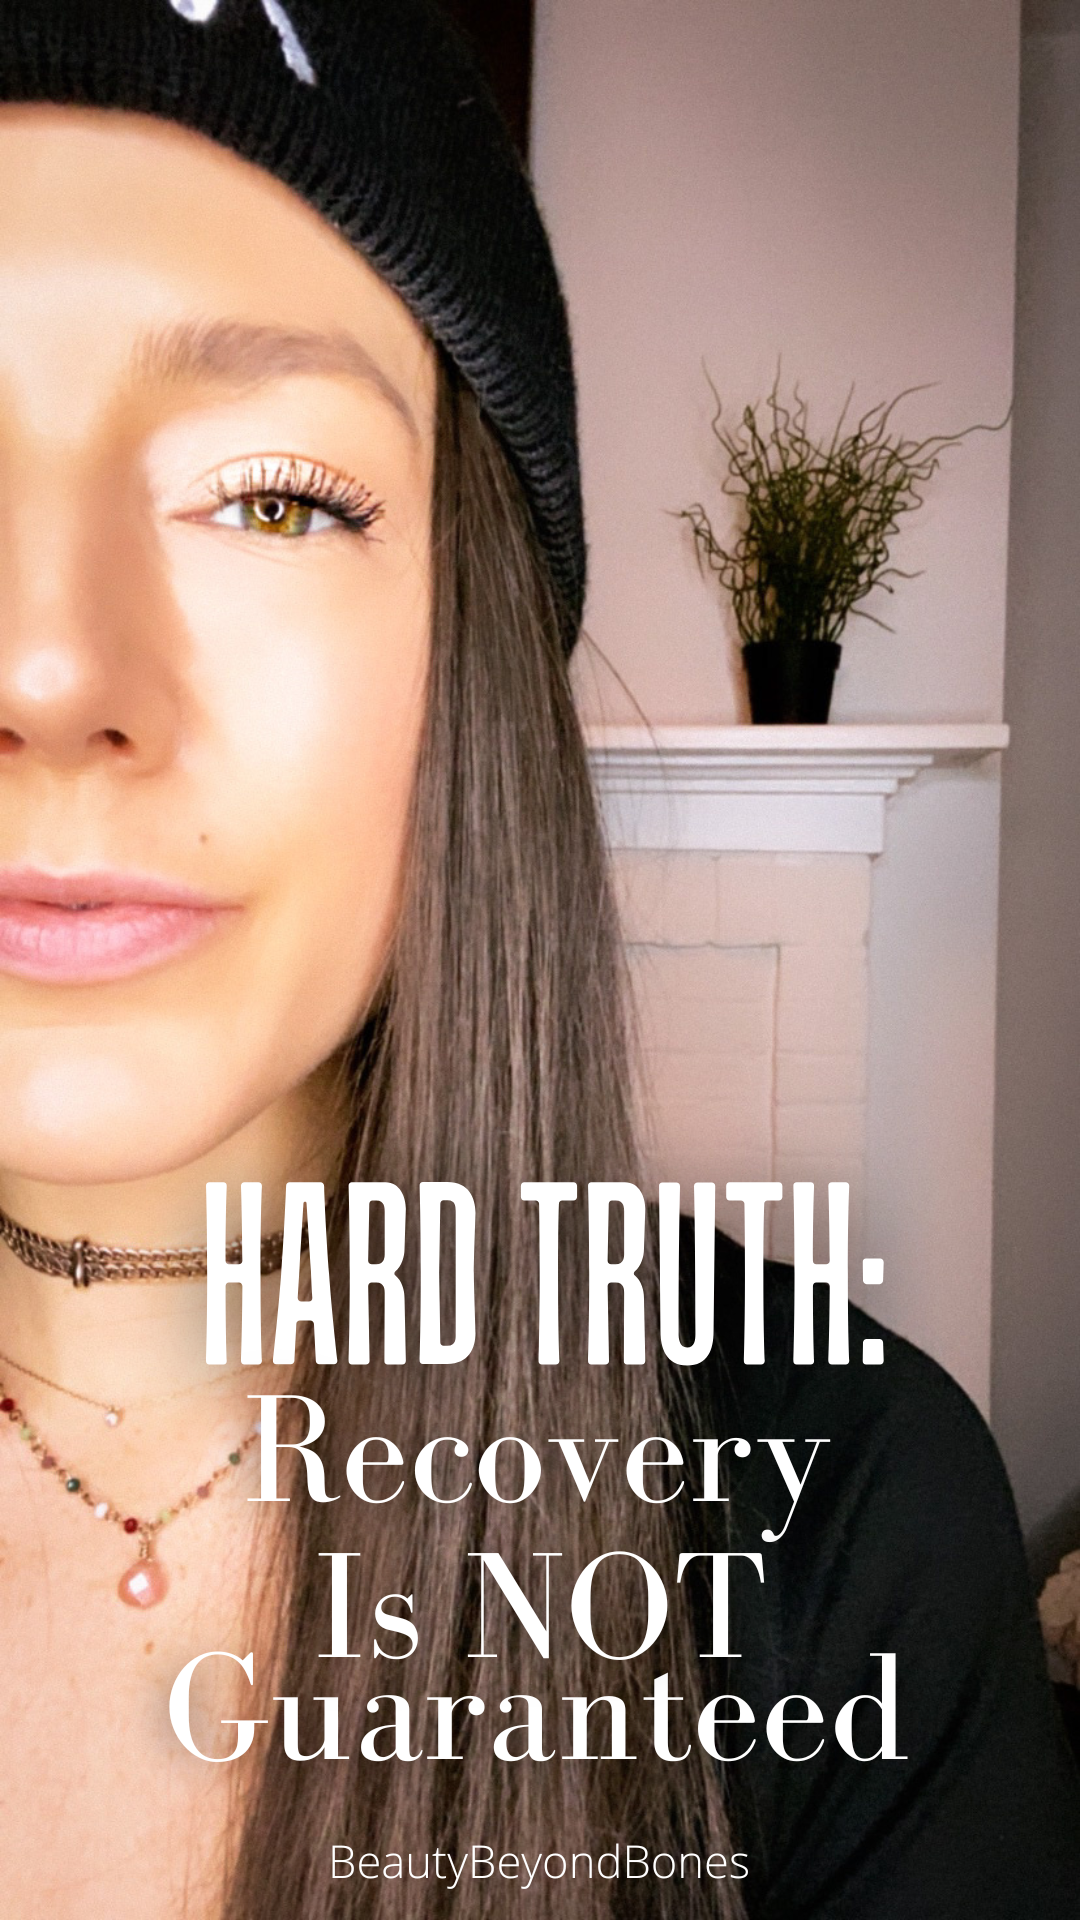 Hard Truth: Recovery is Not Guaranteed